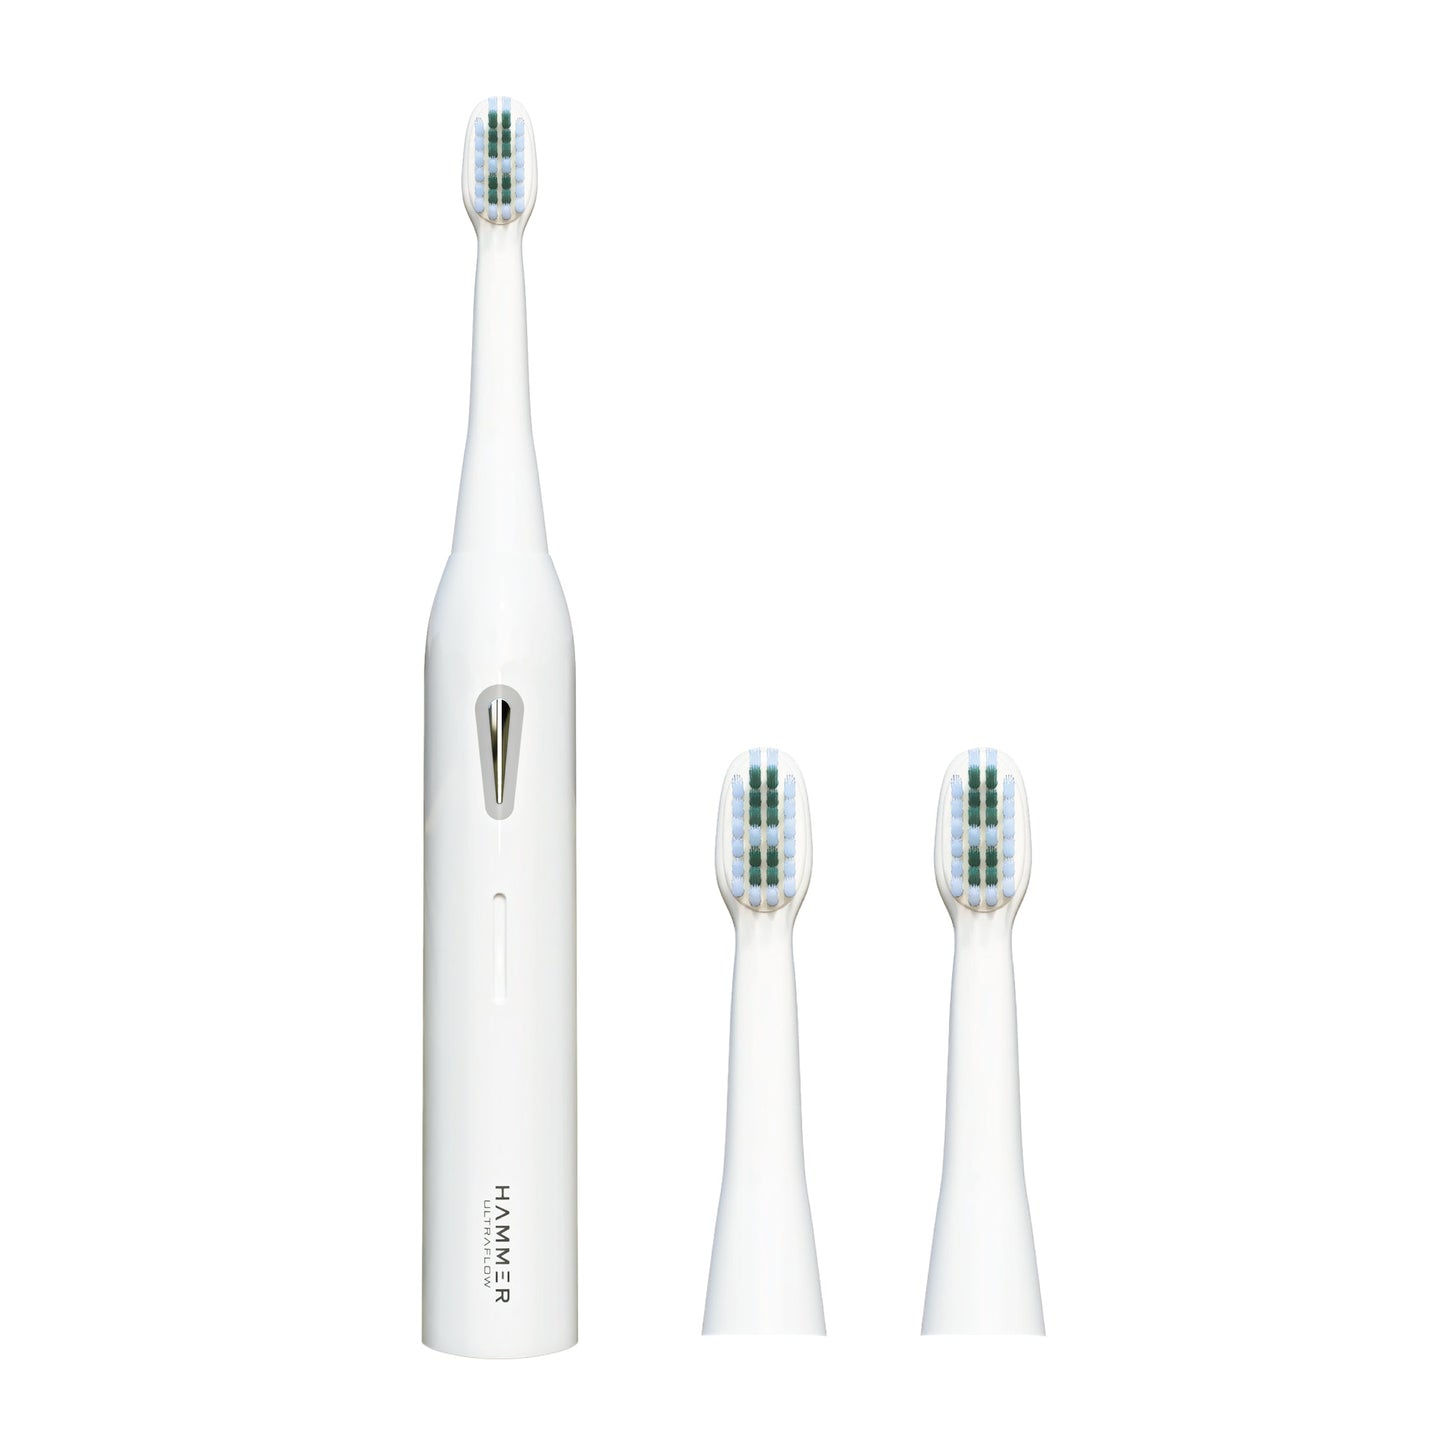 Hammer Ultra Flow Electric Toothbrush- Combo of 3 Colors Blue White  Pink